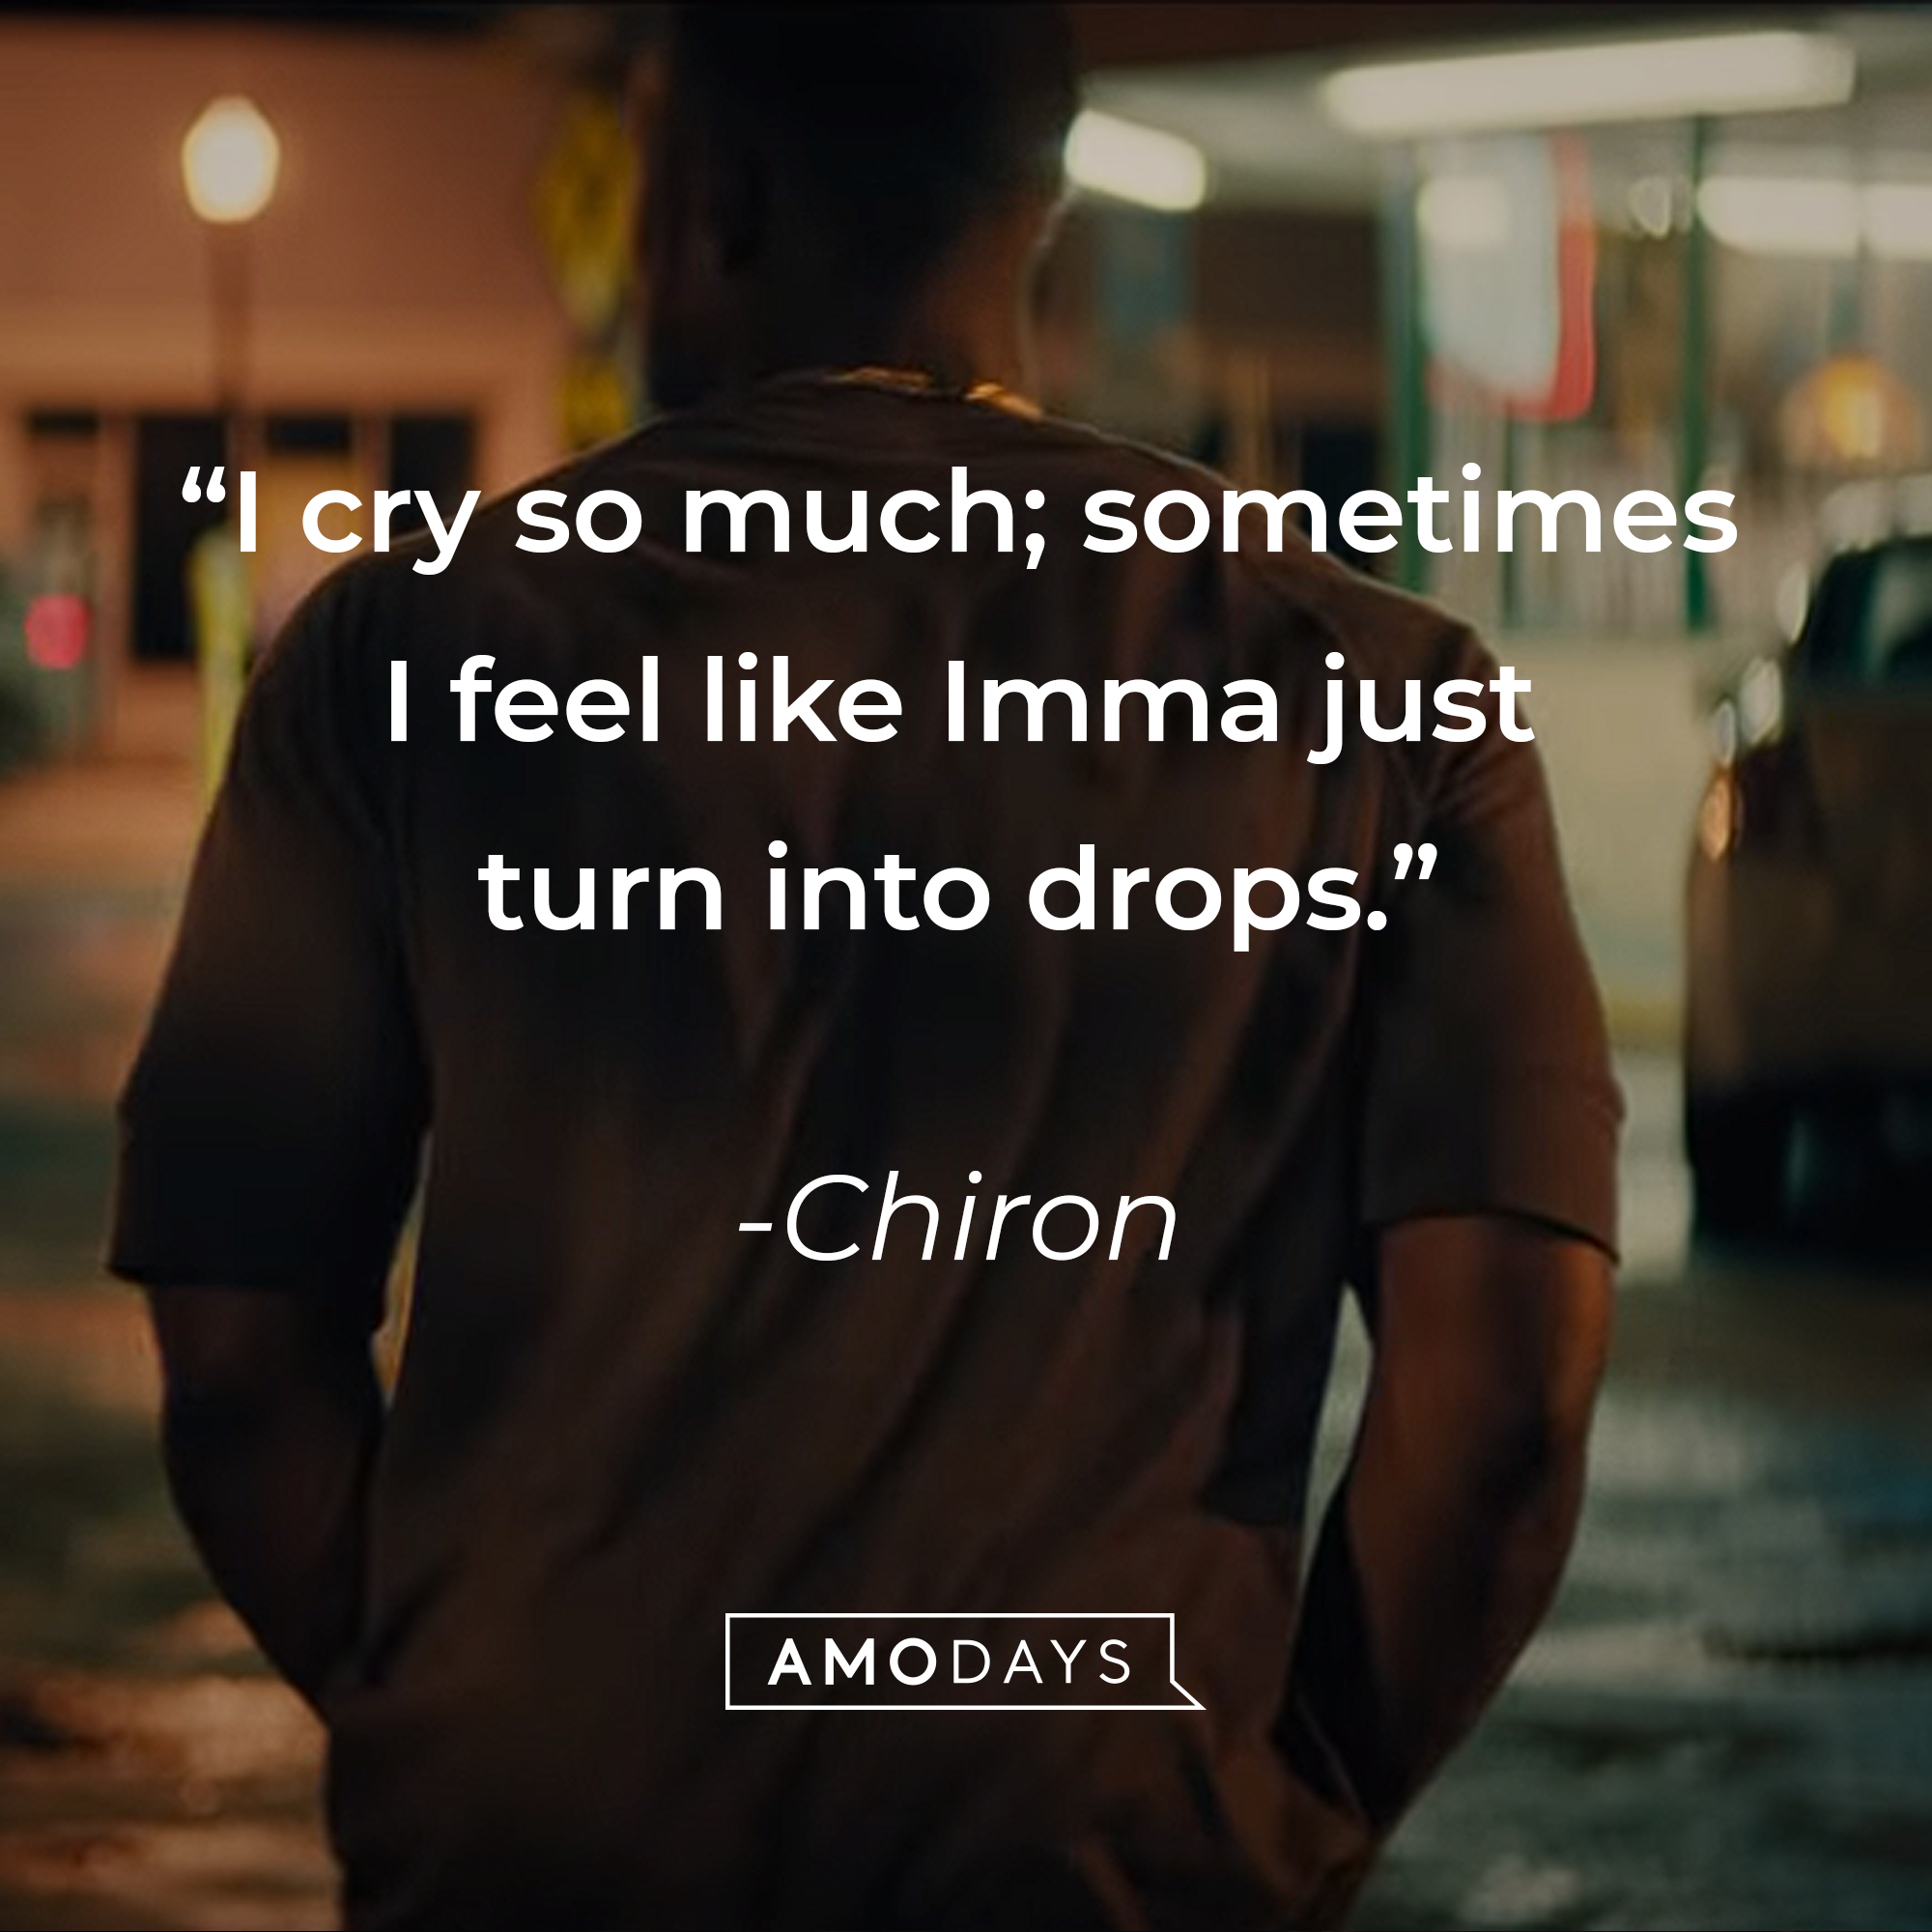 An image of Chiron with his quote: “I cry so much; sometimes I feel like Imma just turn into drops.” | Source: youtube.com/A24